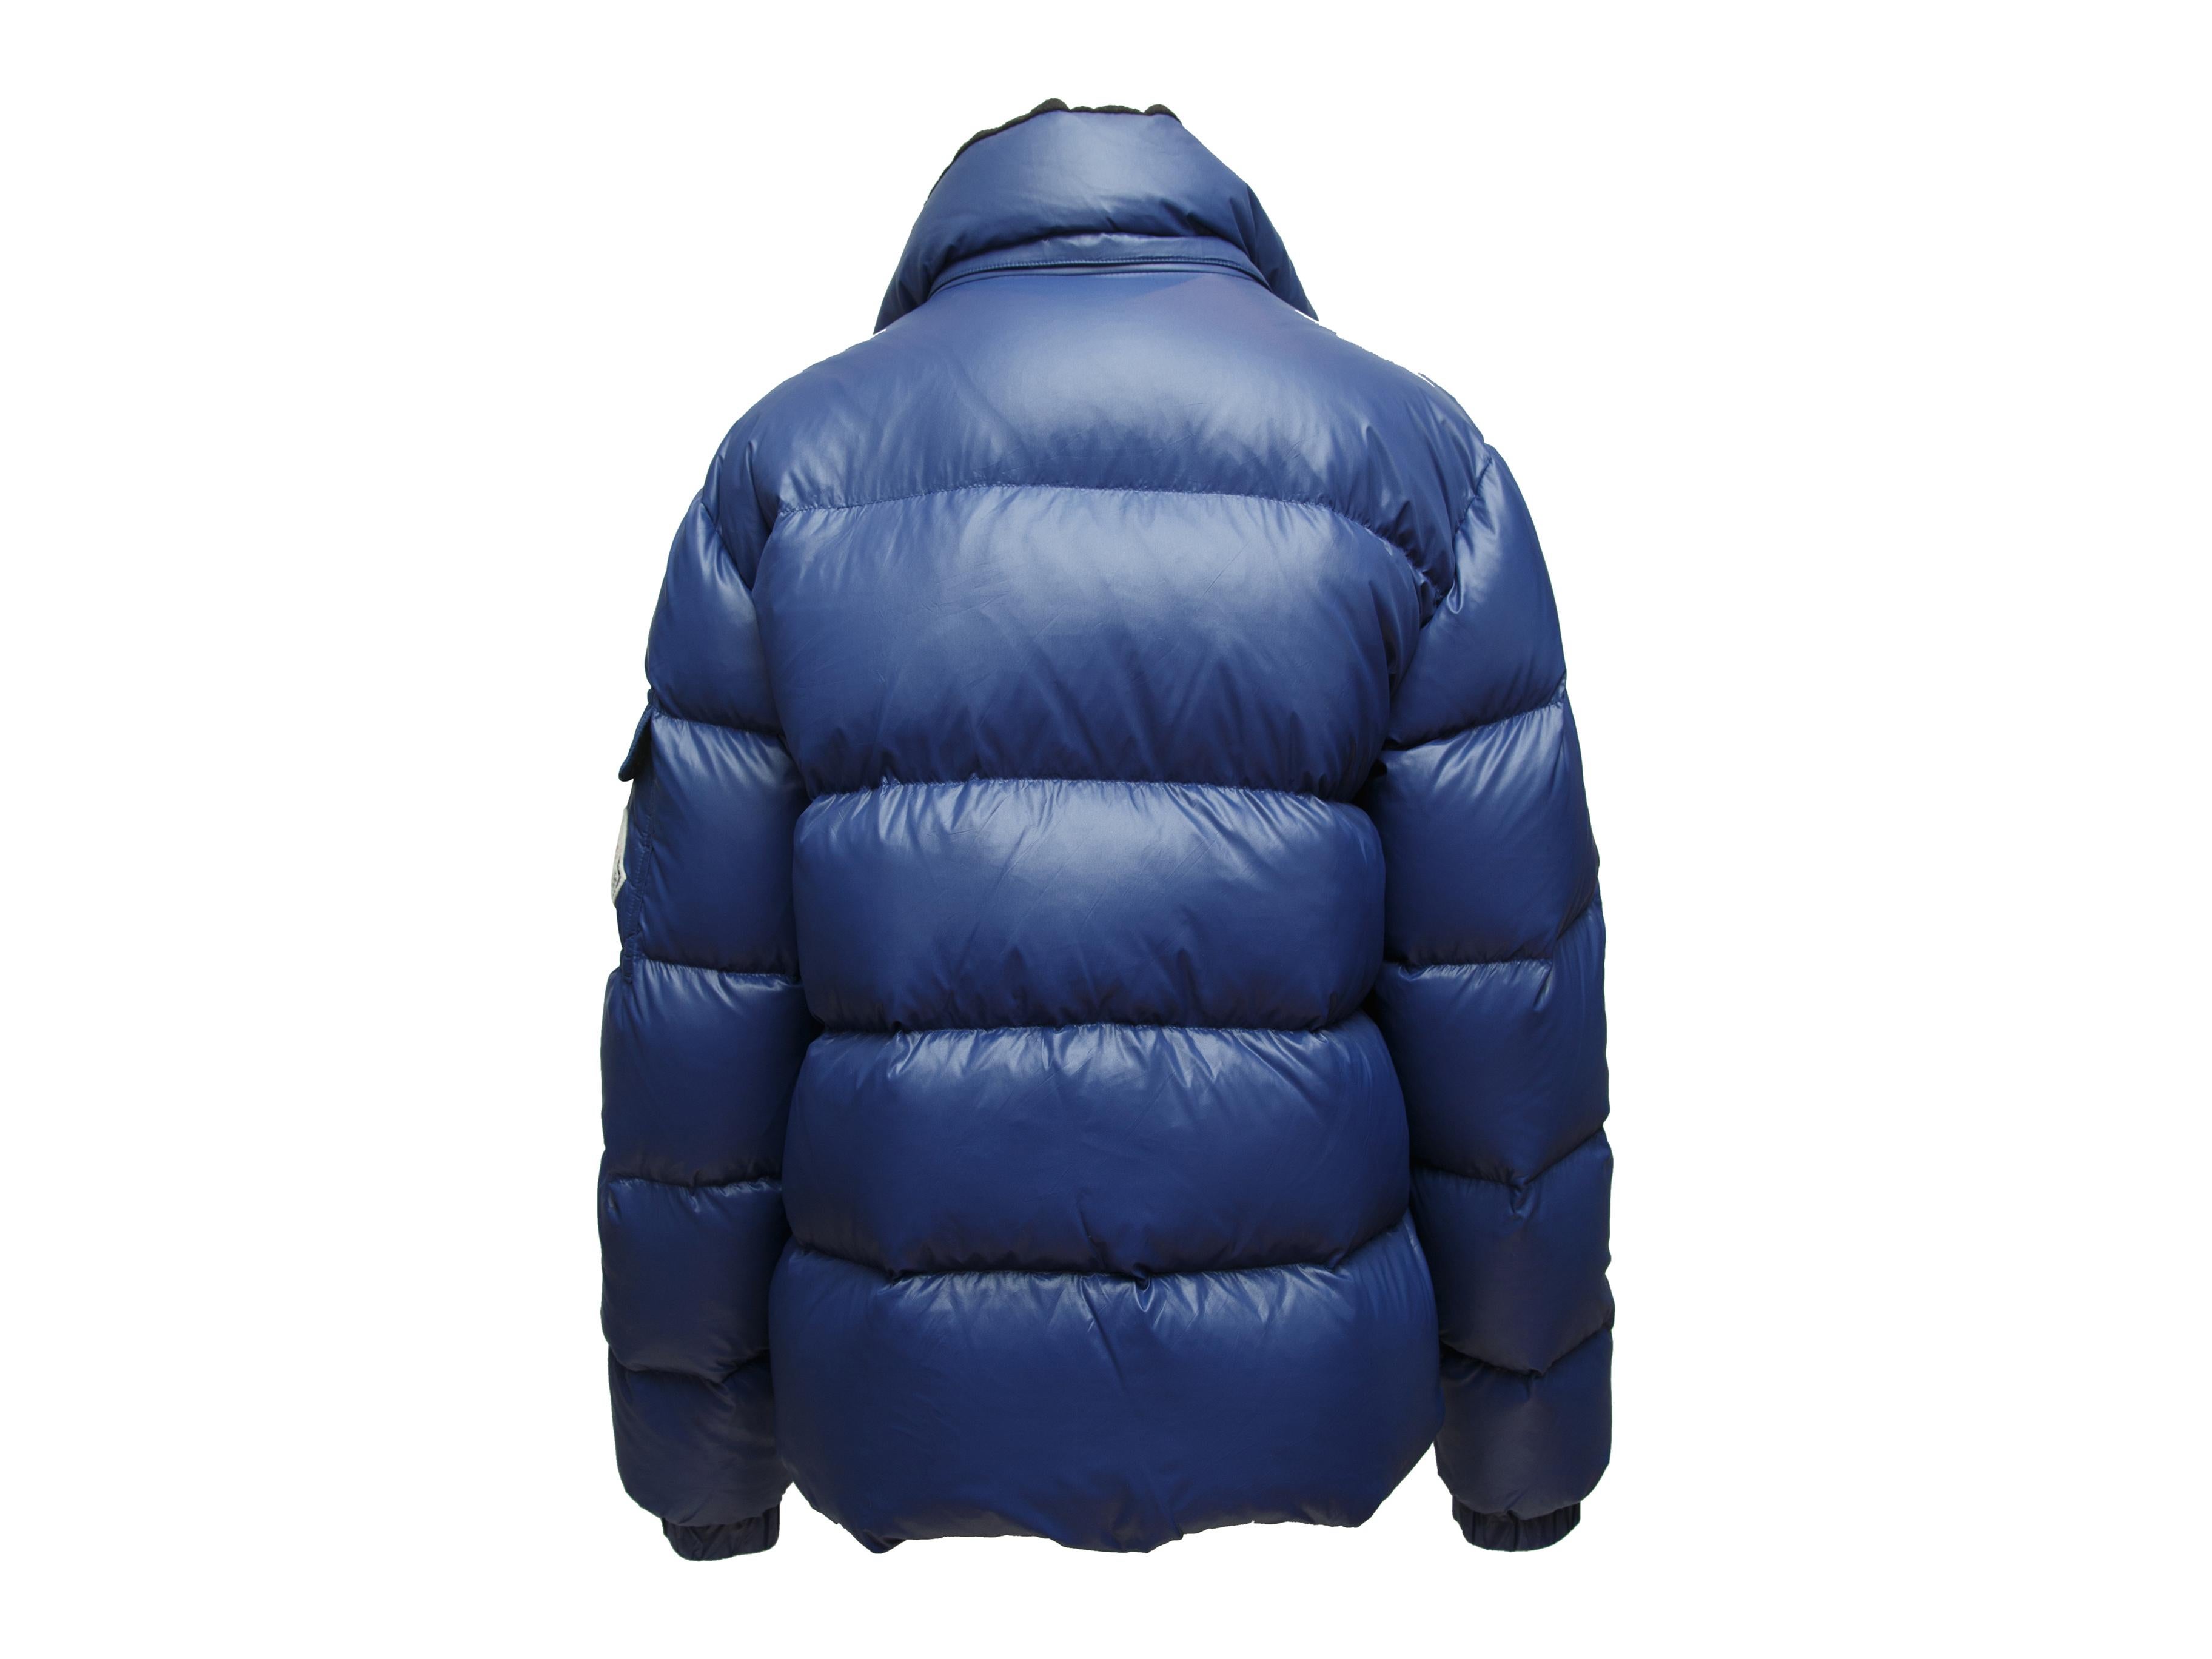 Product details: Navy blue down-filled puffer jacket by Moncler. Dual hip pockets. Zip closure at center front. Designer size 6. 36